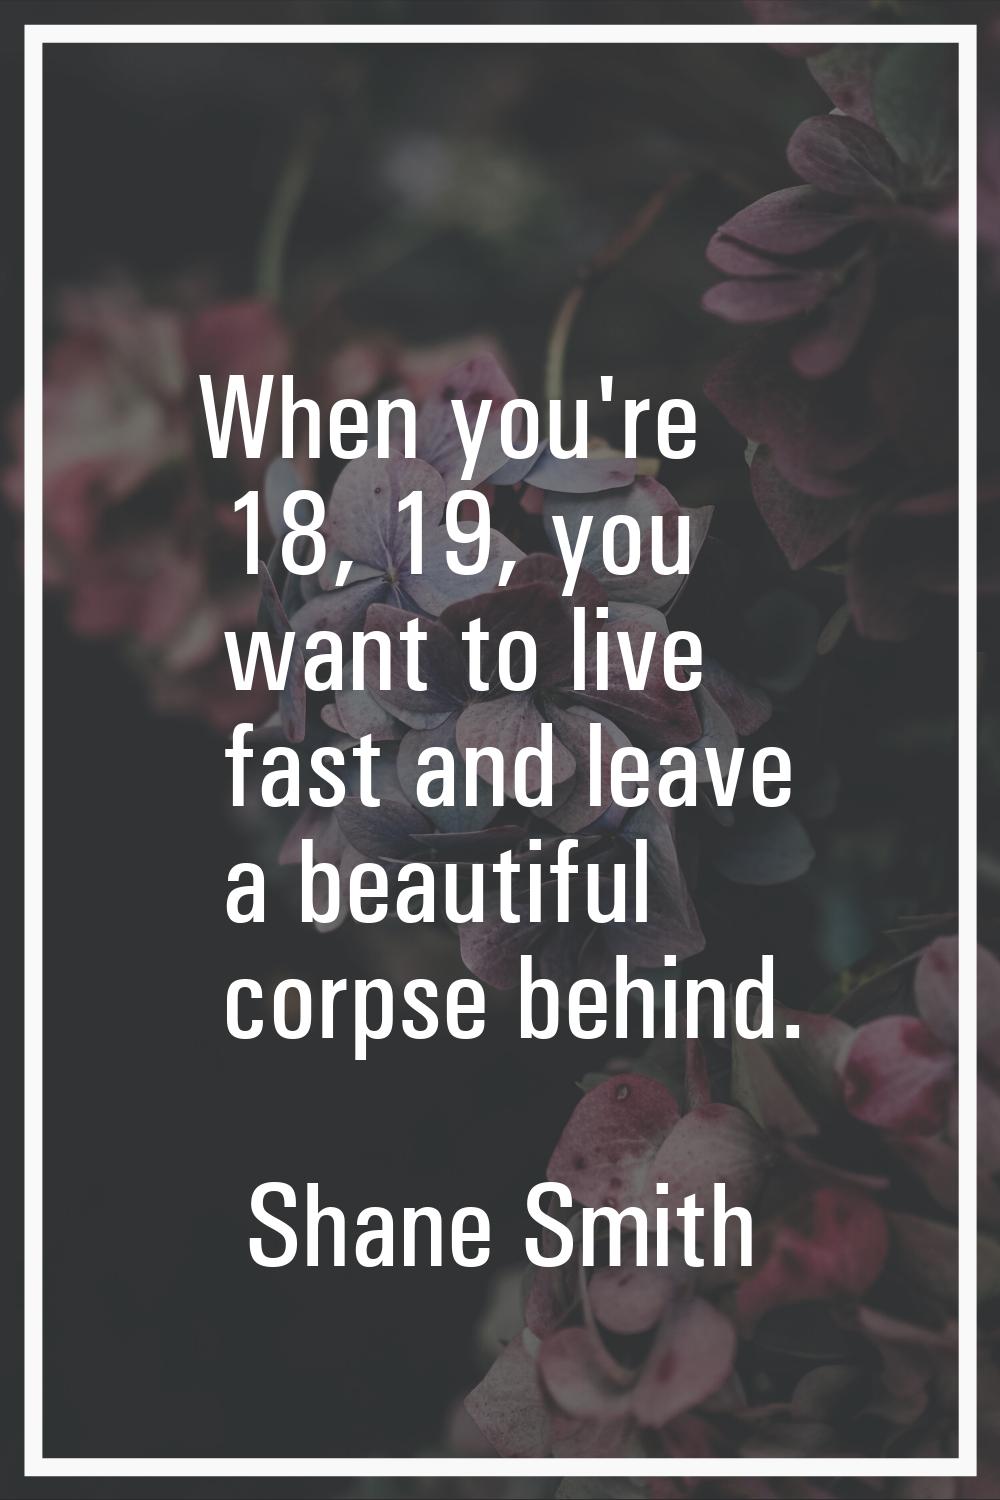 When you're 18, 19, you want to live fast and leave a beautiful corpse behind.